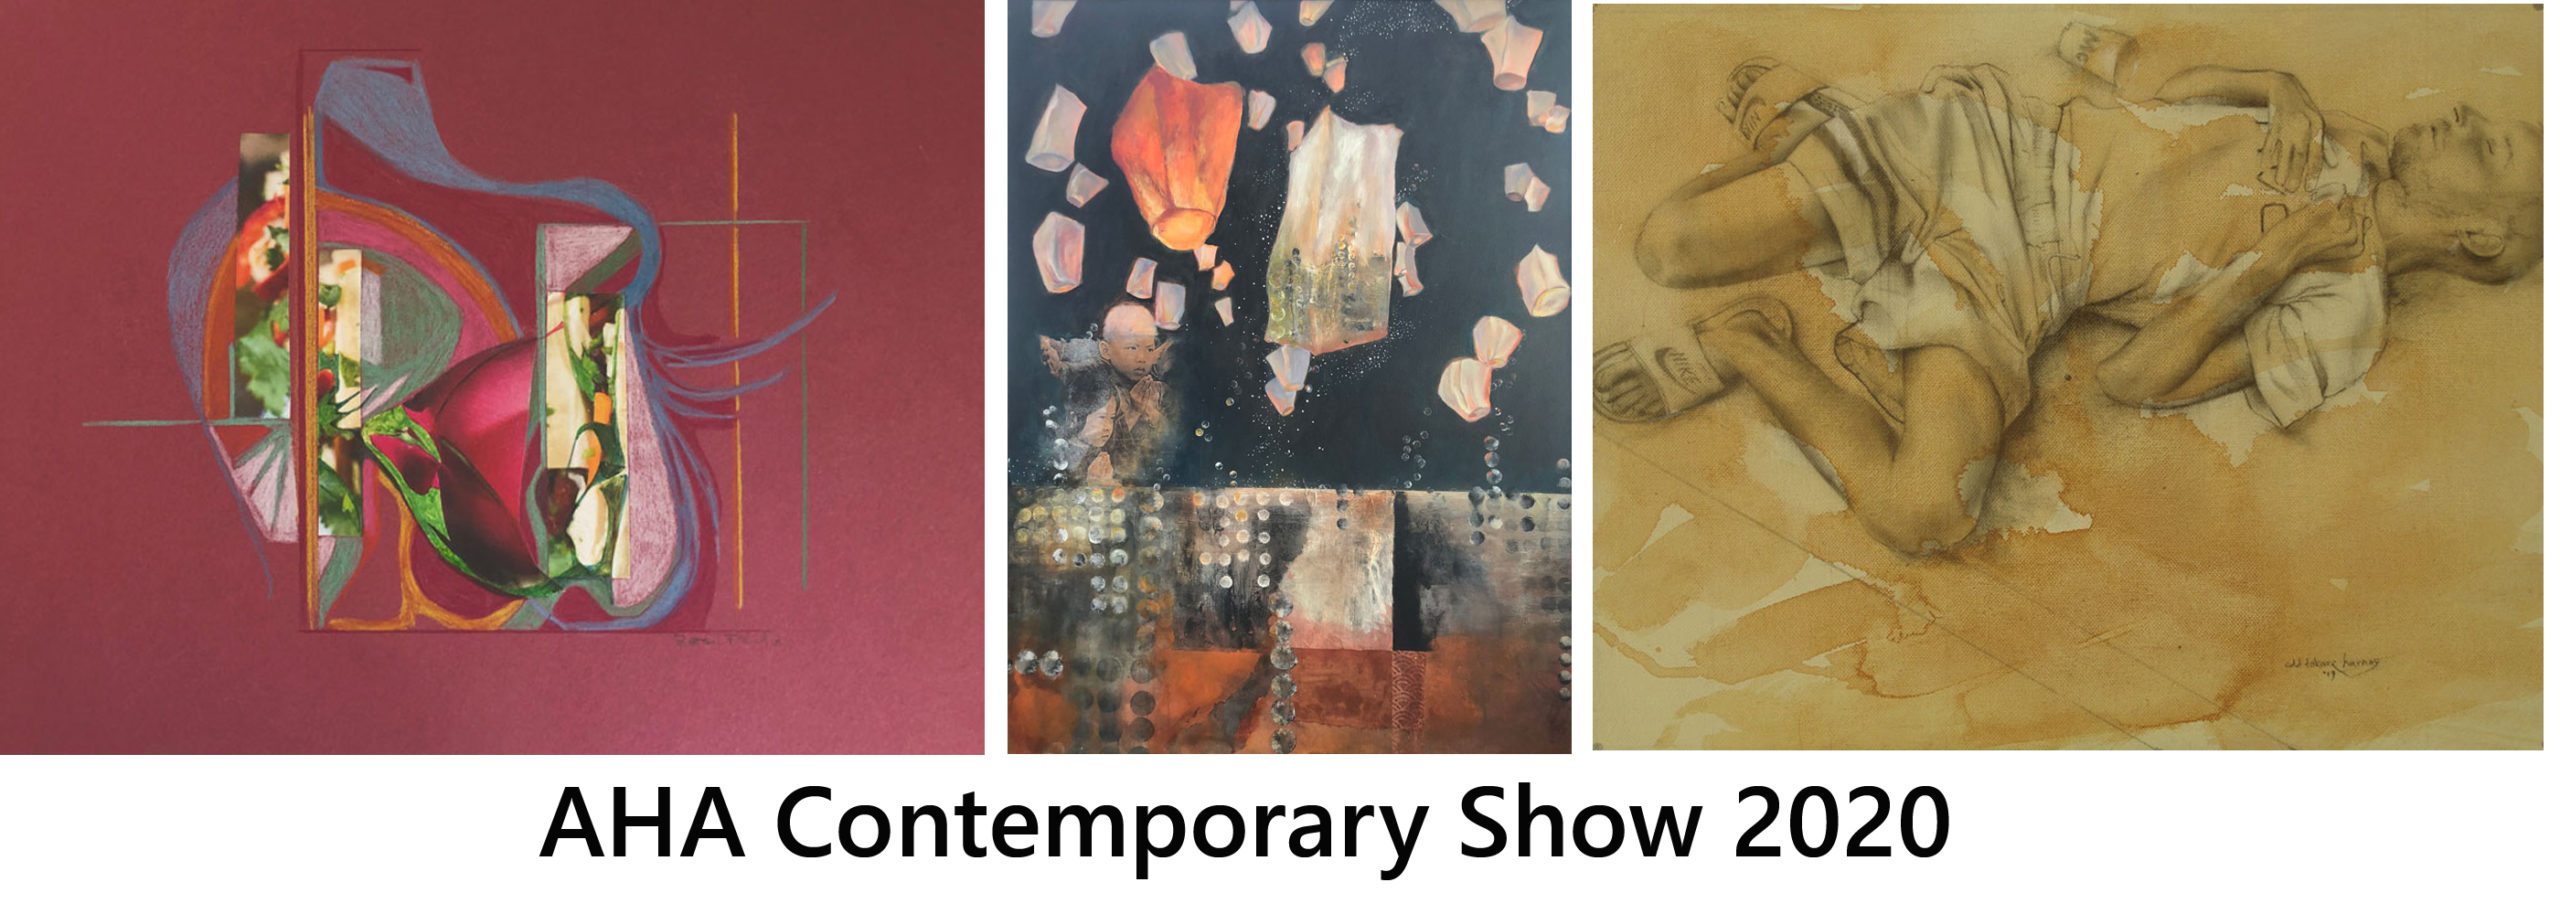 2020 Contemporary Show winers